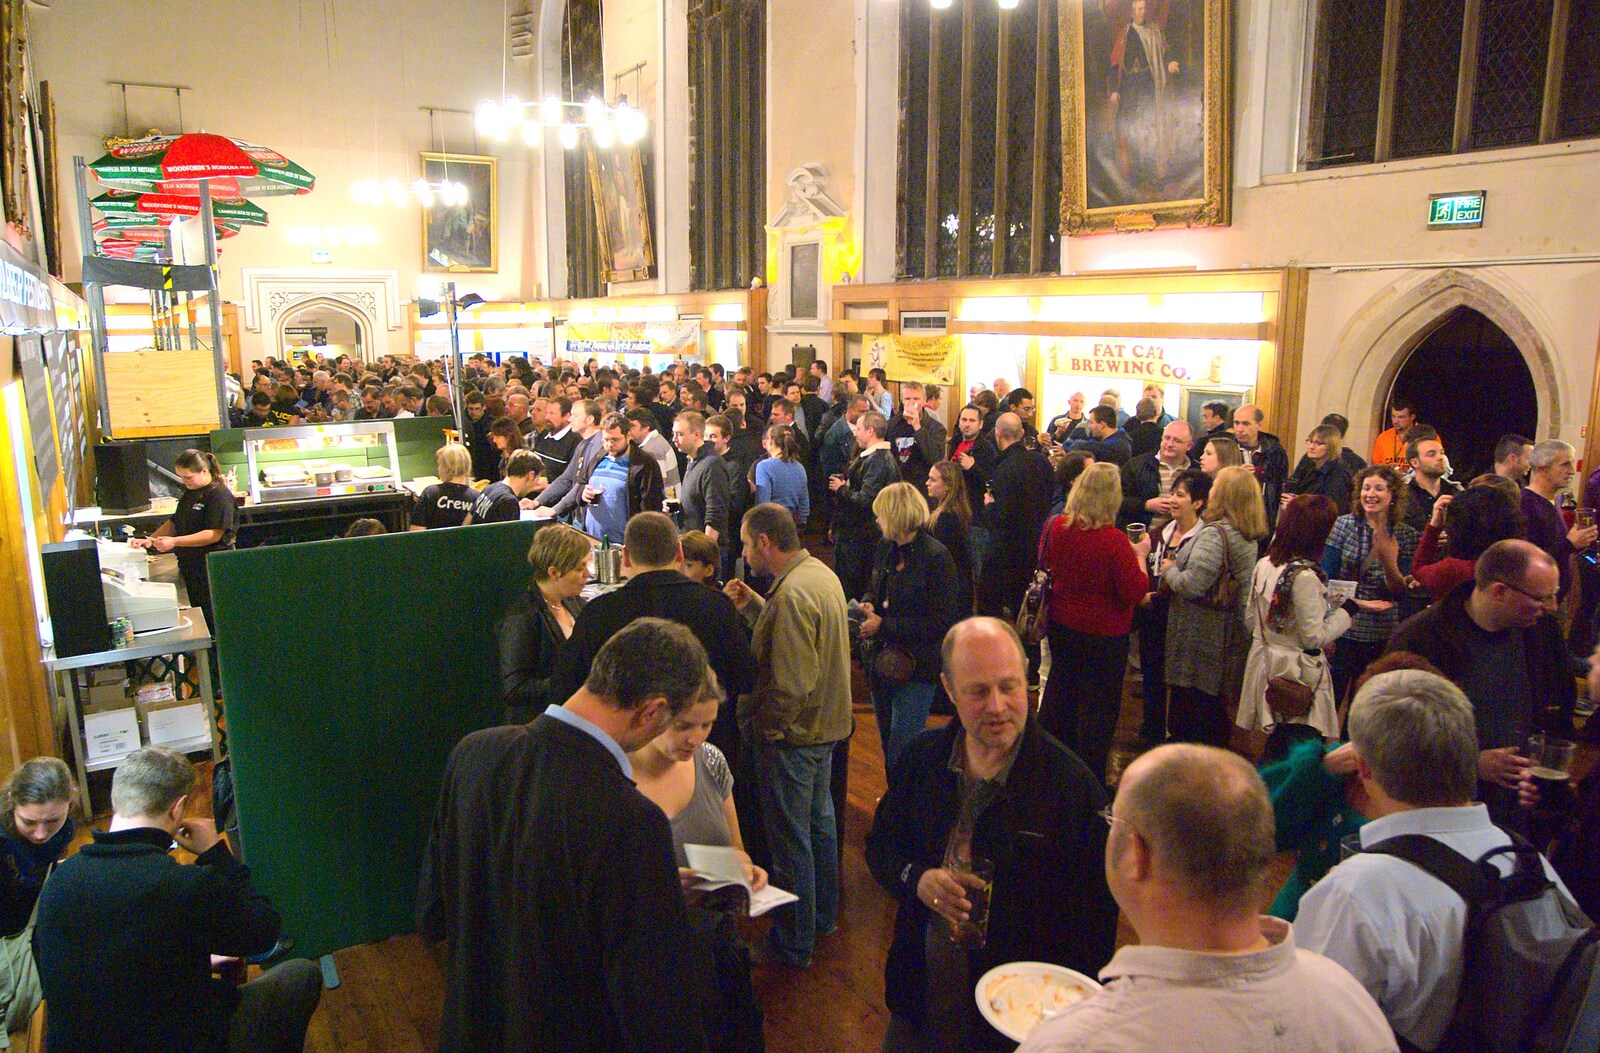 The assembled crowds in Blackfriars Hall from The CAMRA Norwich Beer Festival, St. Andrew's Hall, Norwich - 26th October 2011